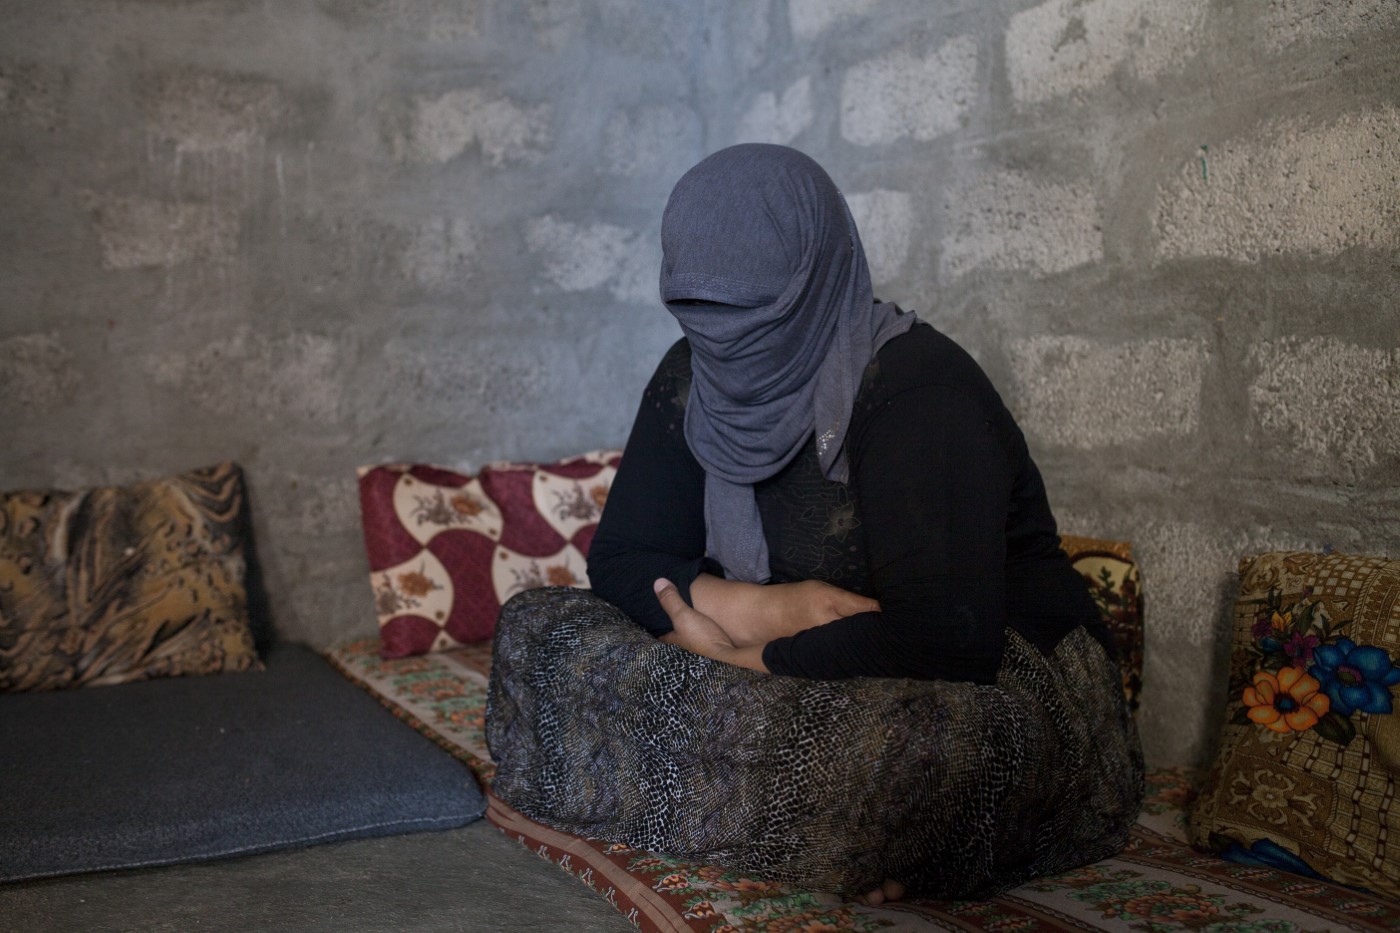 Sayran K. (40). Yazidi woman. Kidnapped by the IS on August 3, 2014 in Shangal, she covers her face for fear of being discovered. Obliged to convert to Islam. Her family was able to rescue her from the IS for 20,000 dollars. Three years later, she knew nothing of his six daughters and two children still in the hands of the Islamic State. Duhok, Kurdistan, Iraq. July 4, 2017